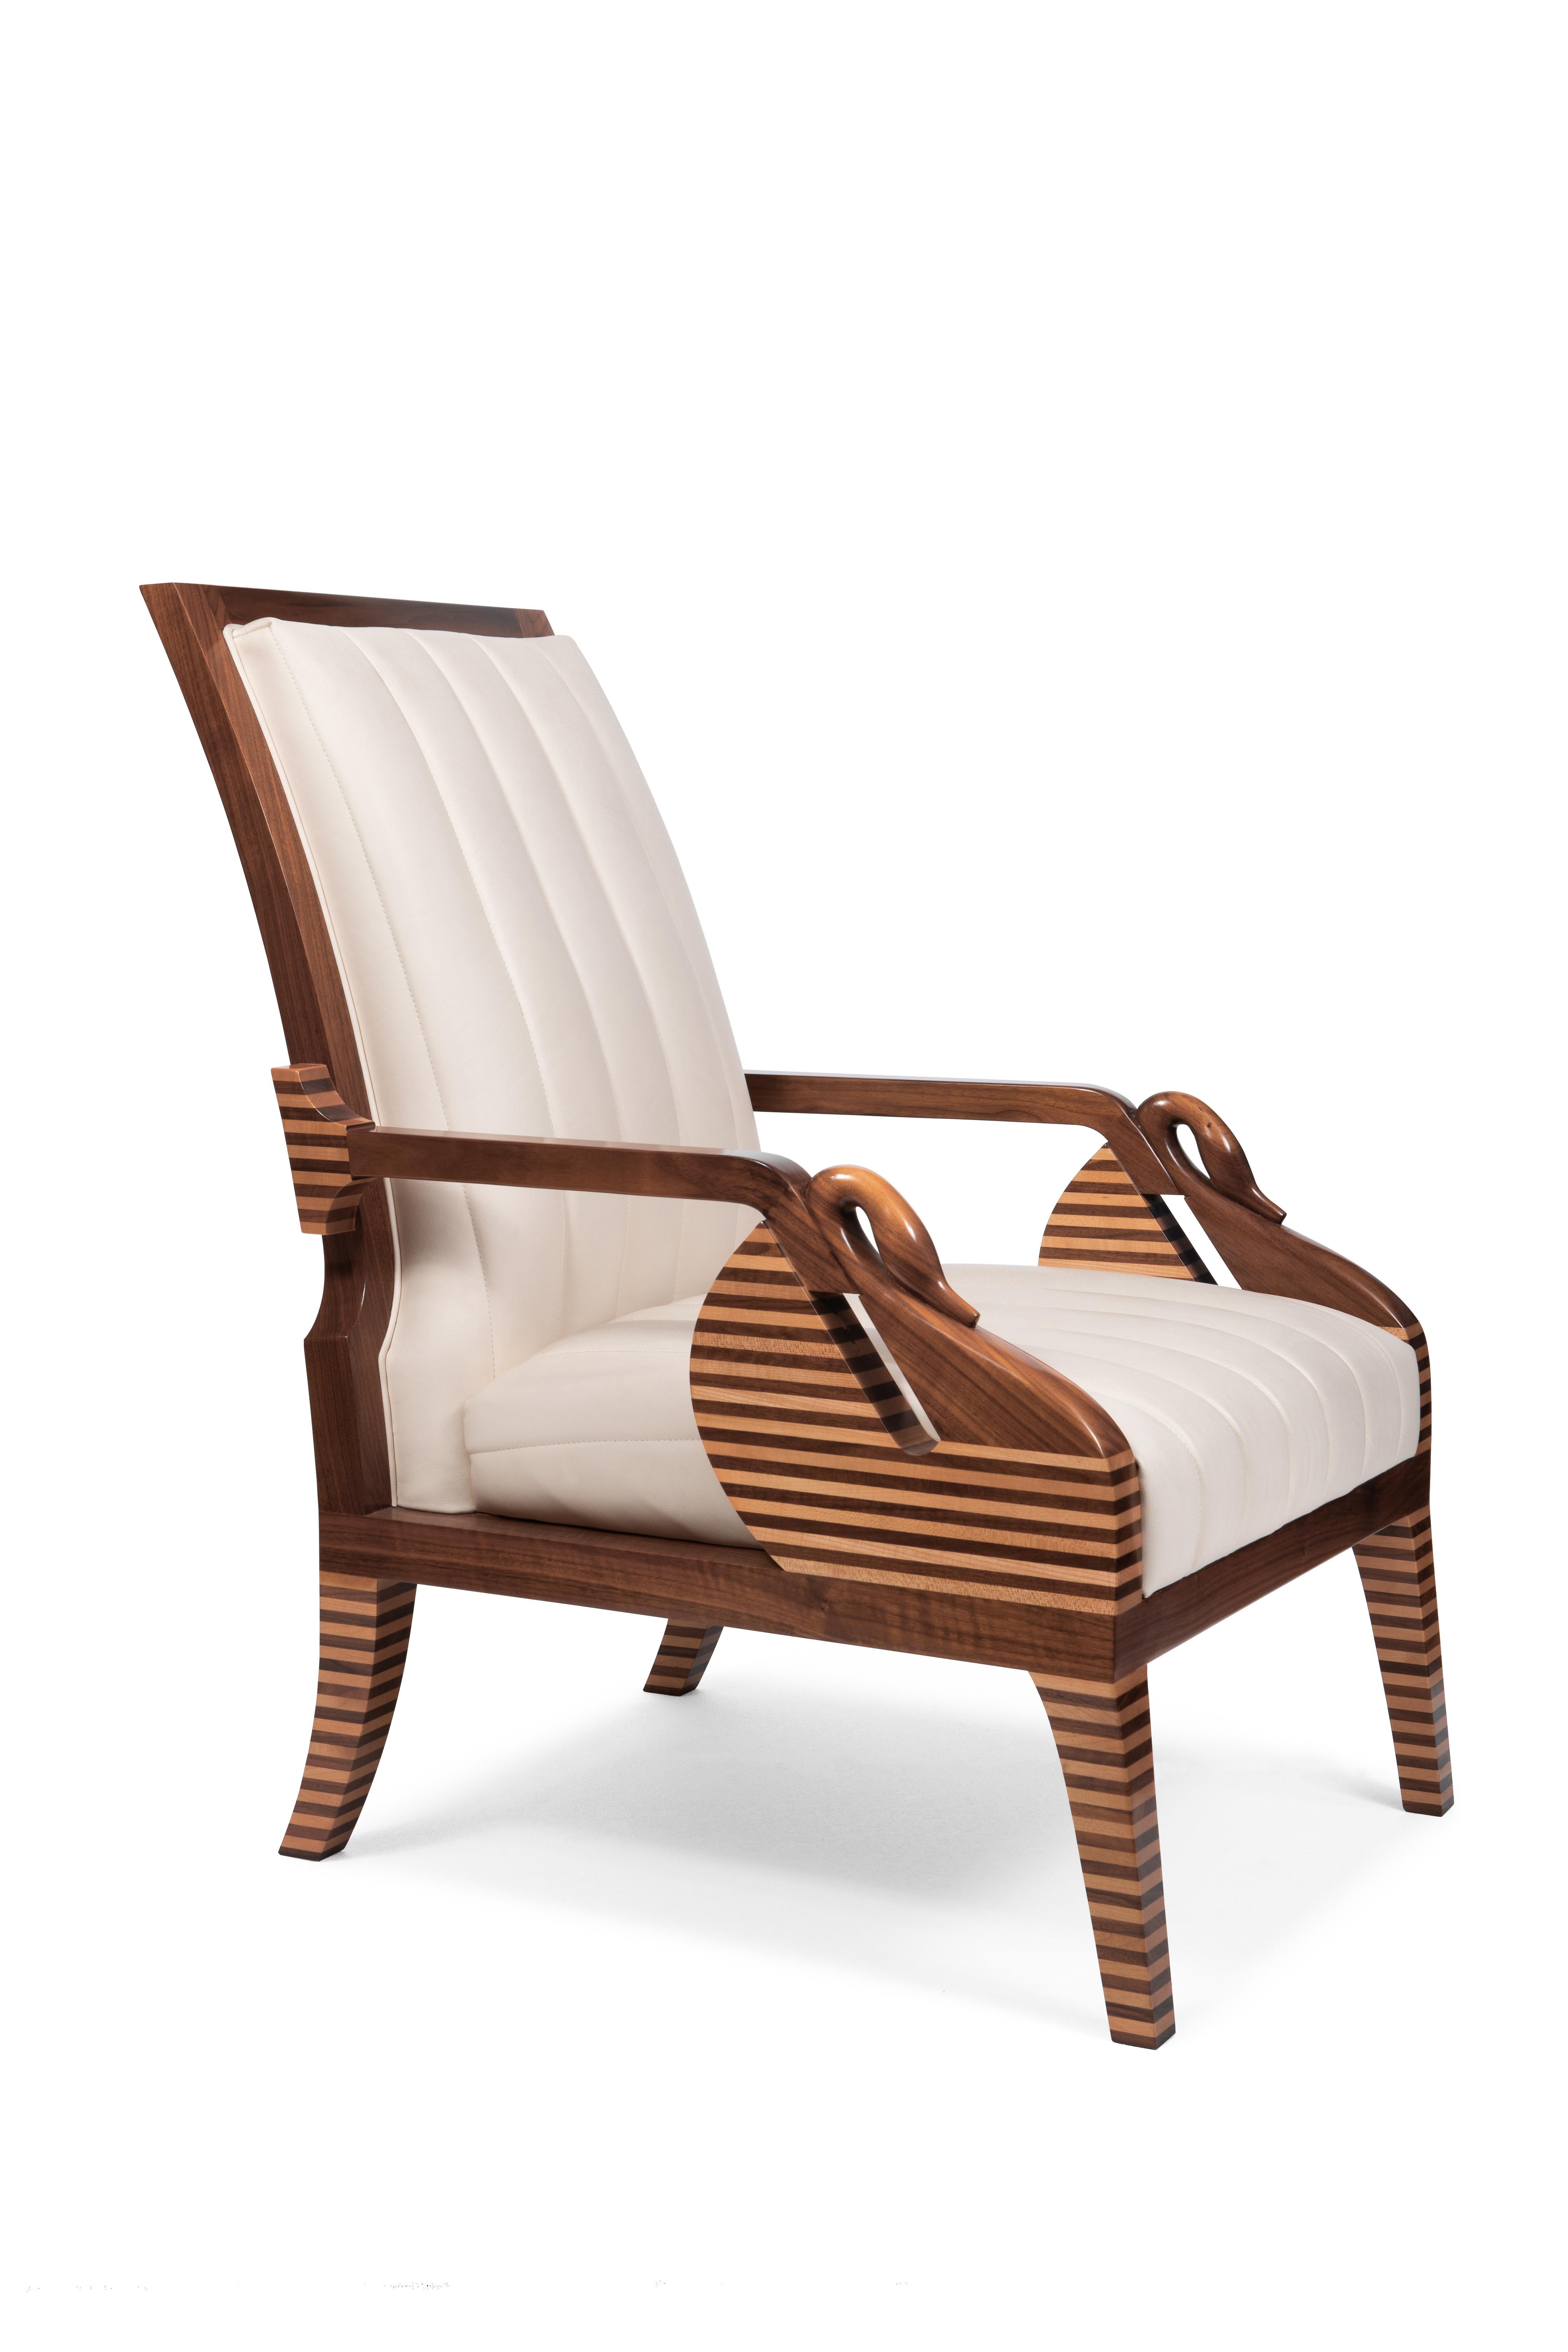 Italian Walnut and Maple Wood Modern Armchair with Decorative Swans, Made in Italy For Sale